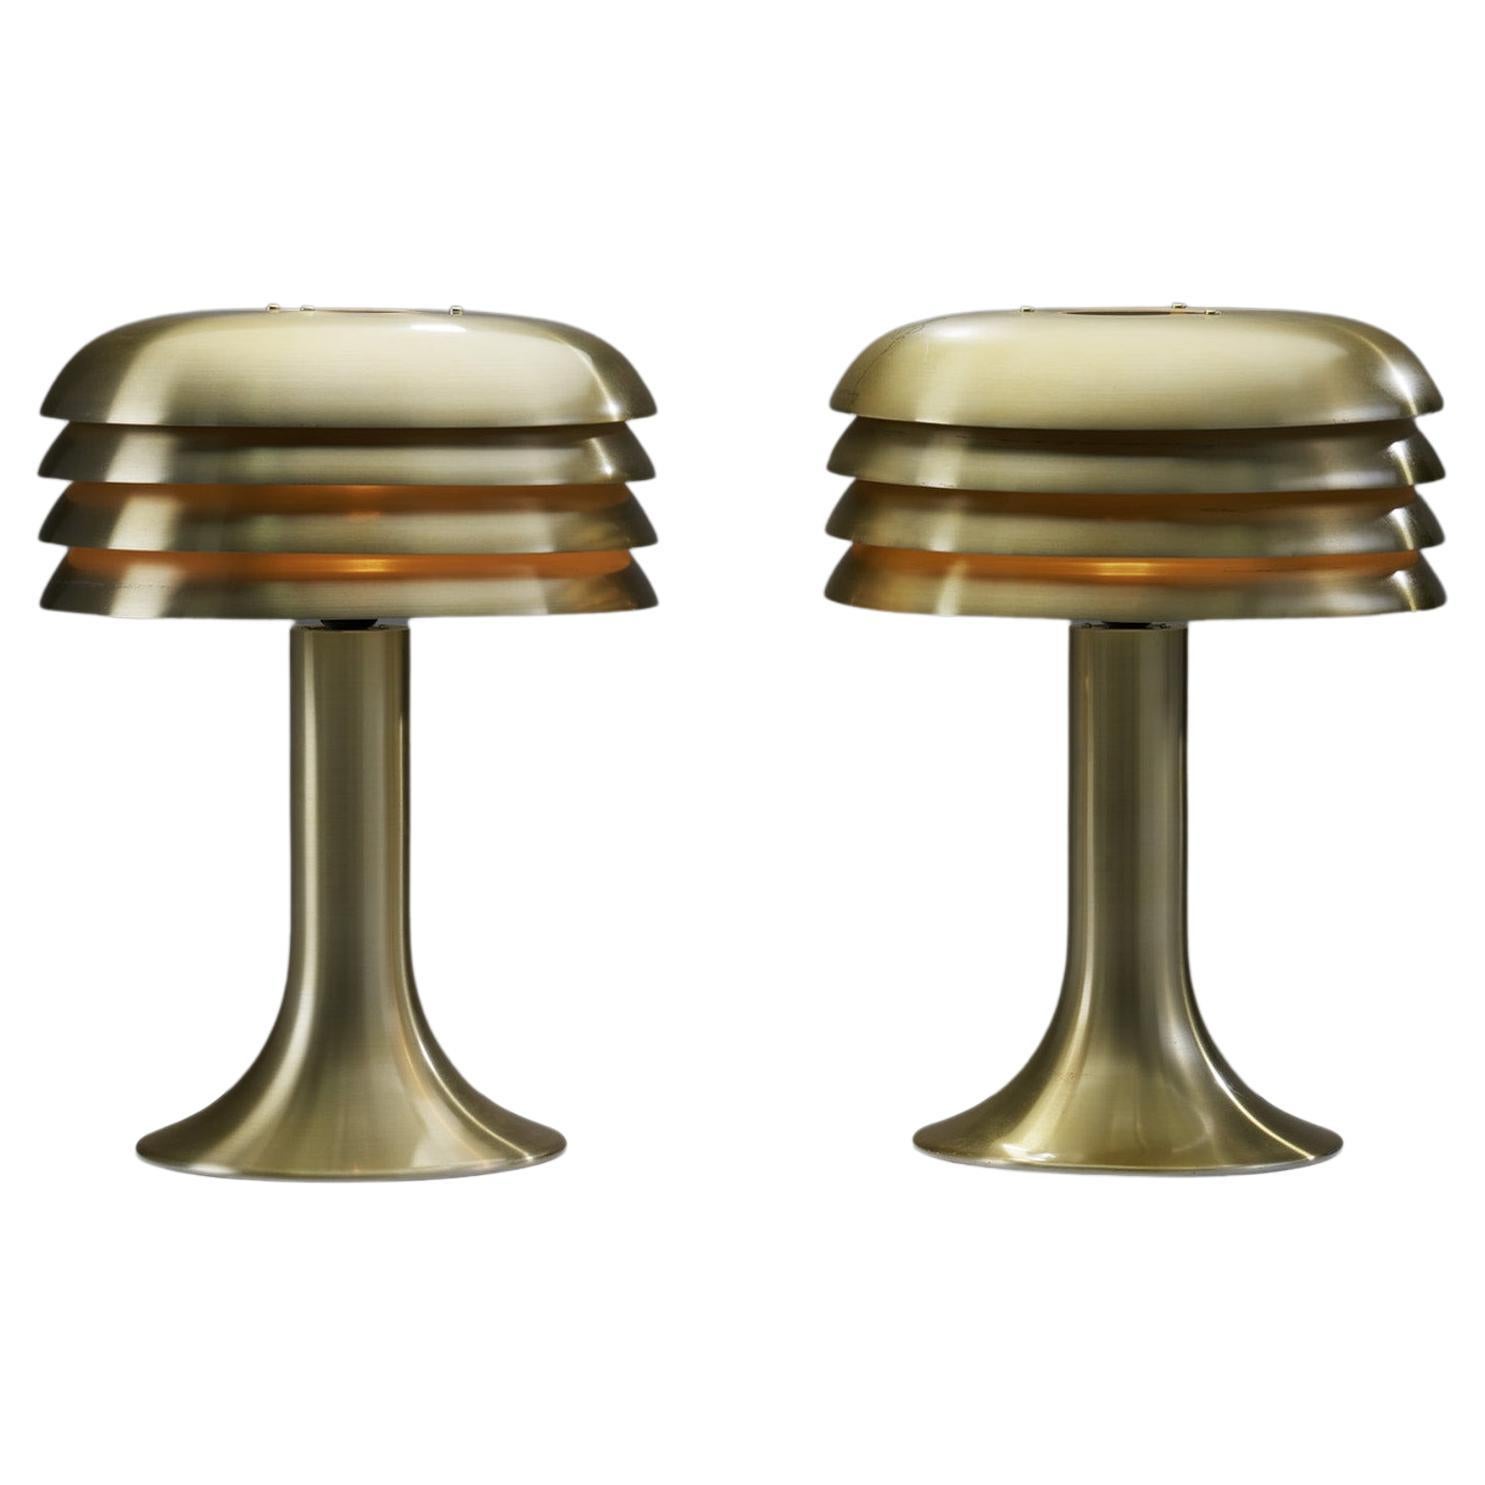 Hans-Agne Jakobsson Pair of "BN-26" Table Lamps for AB Markaryd, Sweden 1950s For Sale